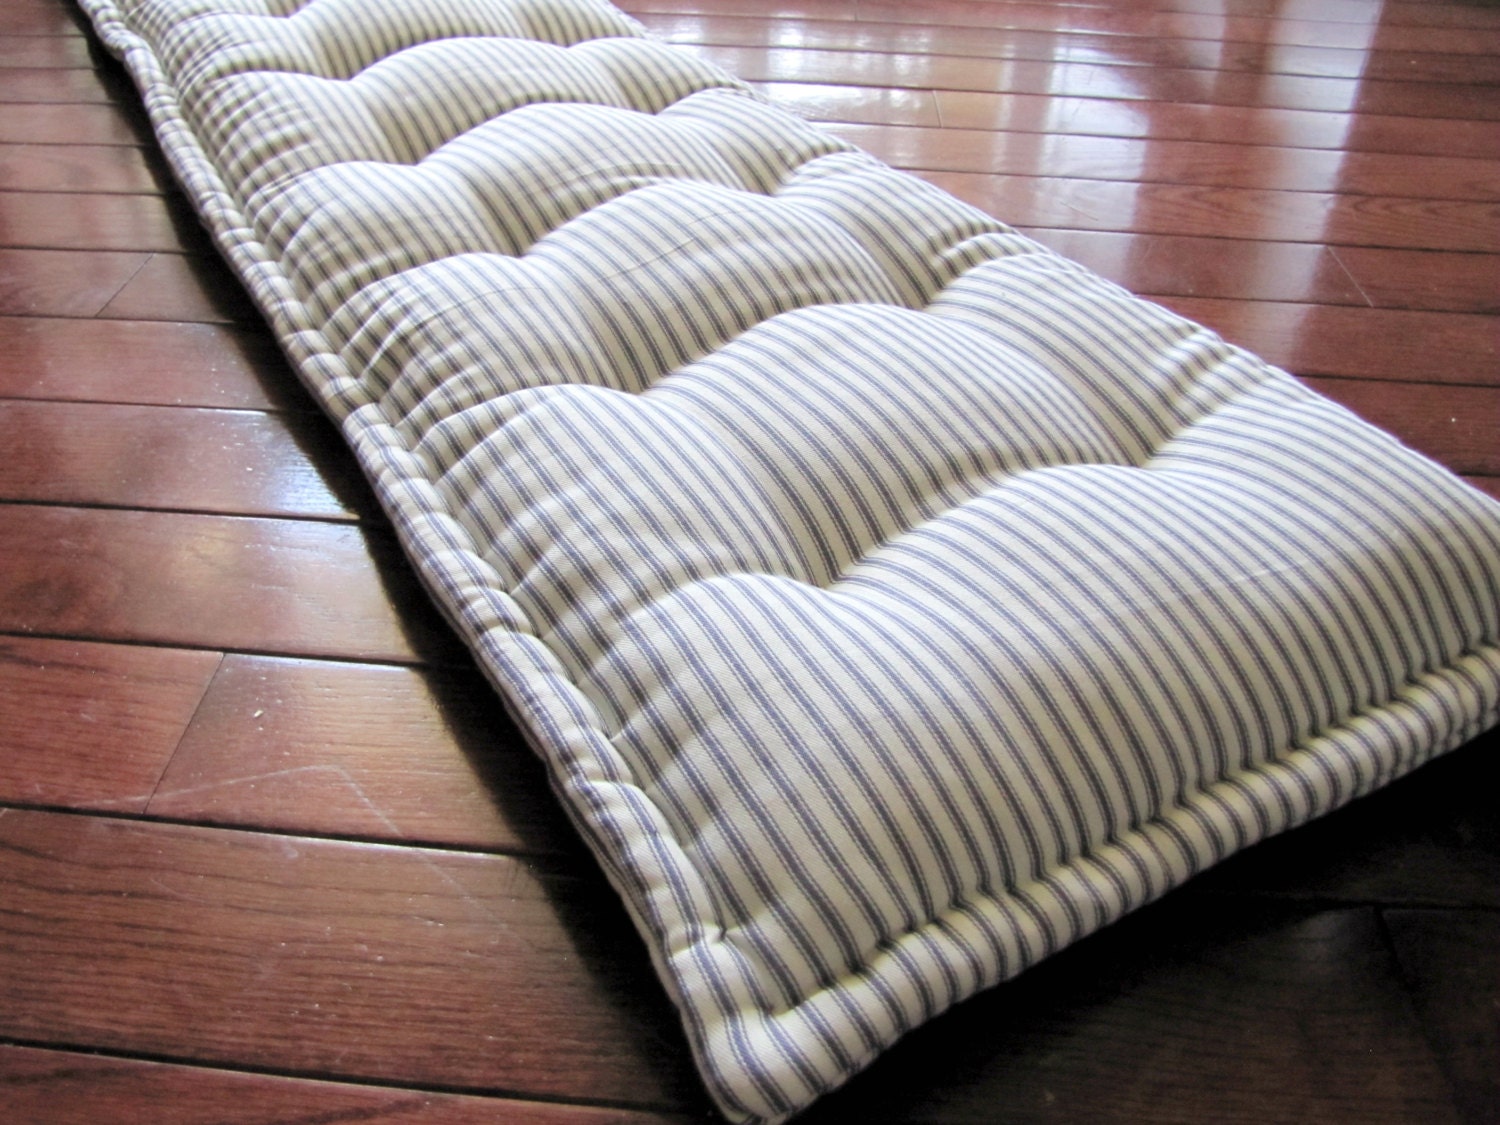 Grateful Home — Custom Cushions in Ticking Stripes with French